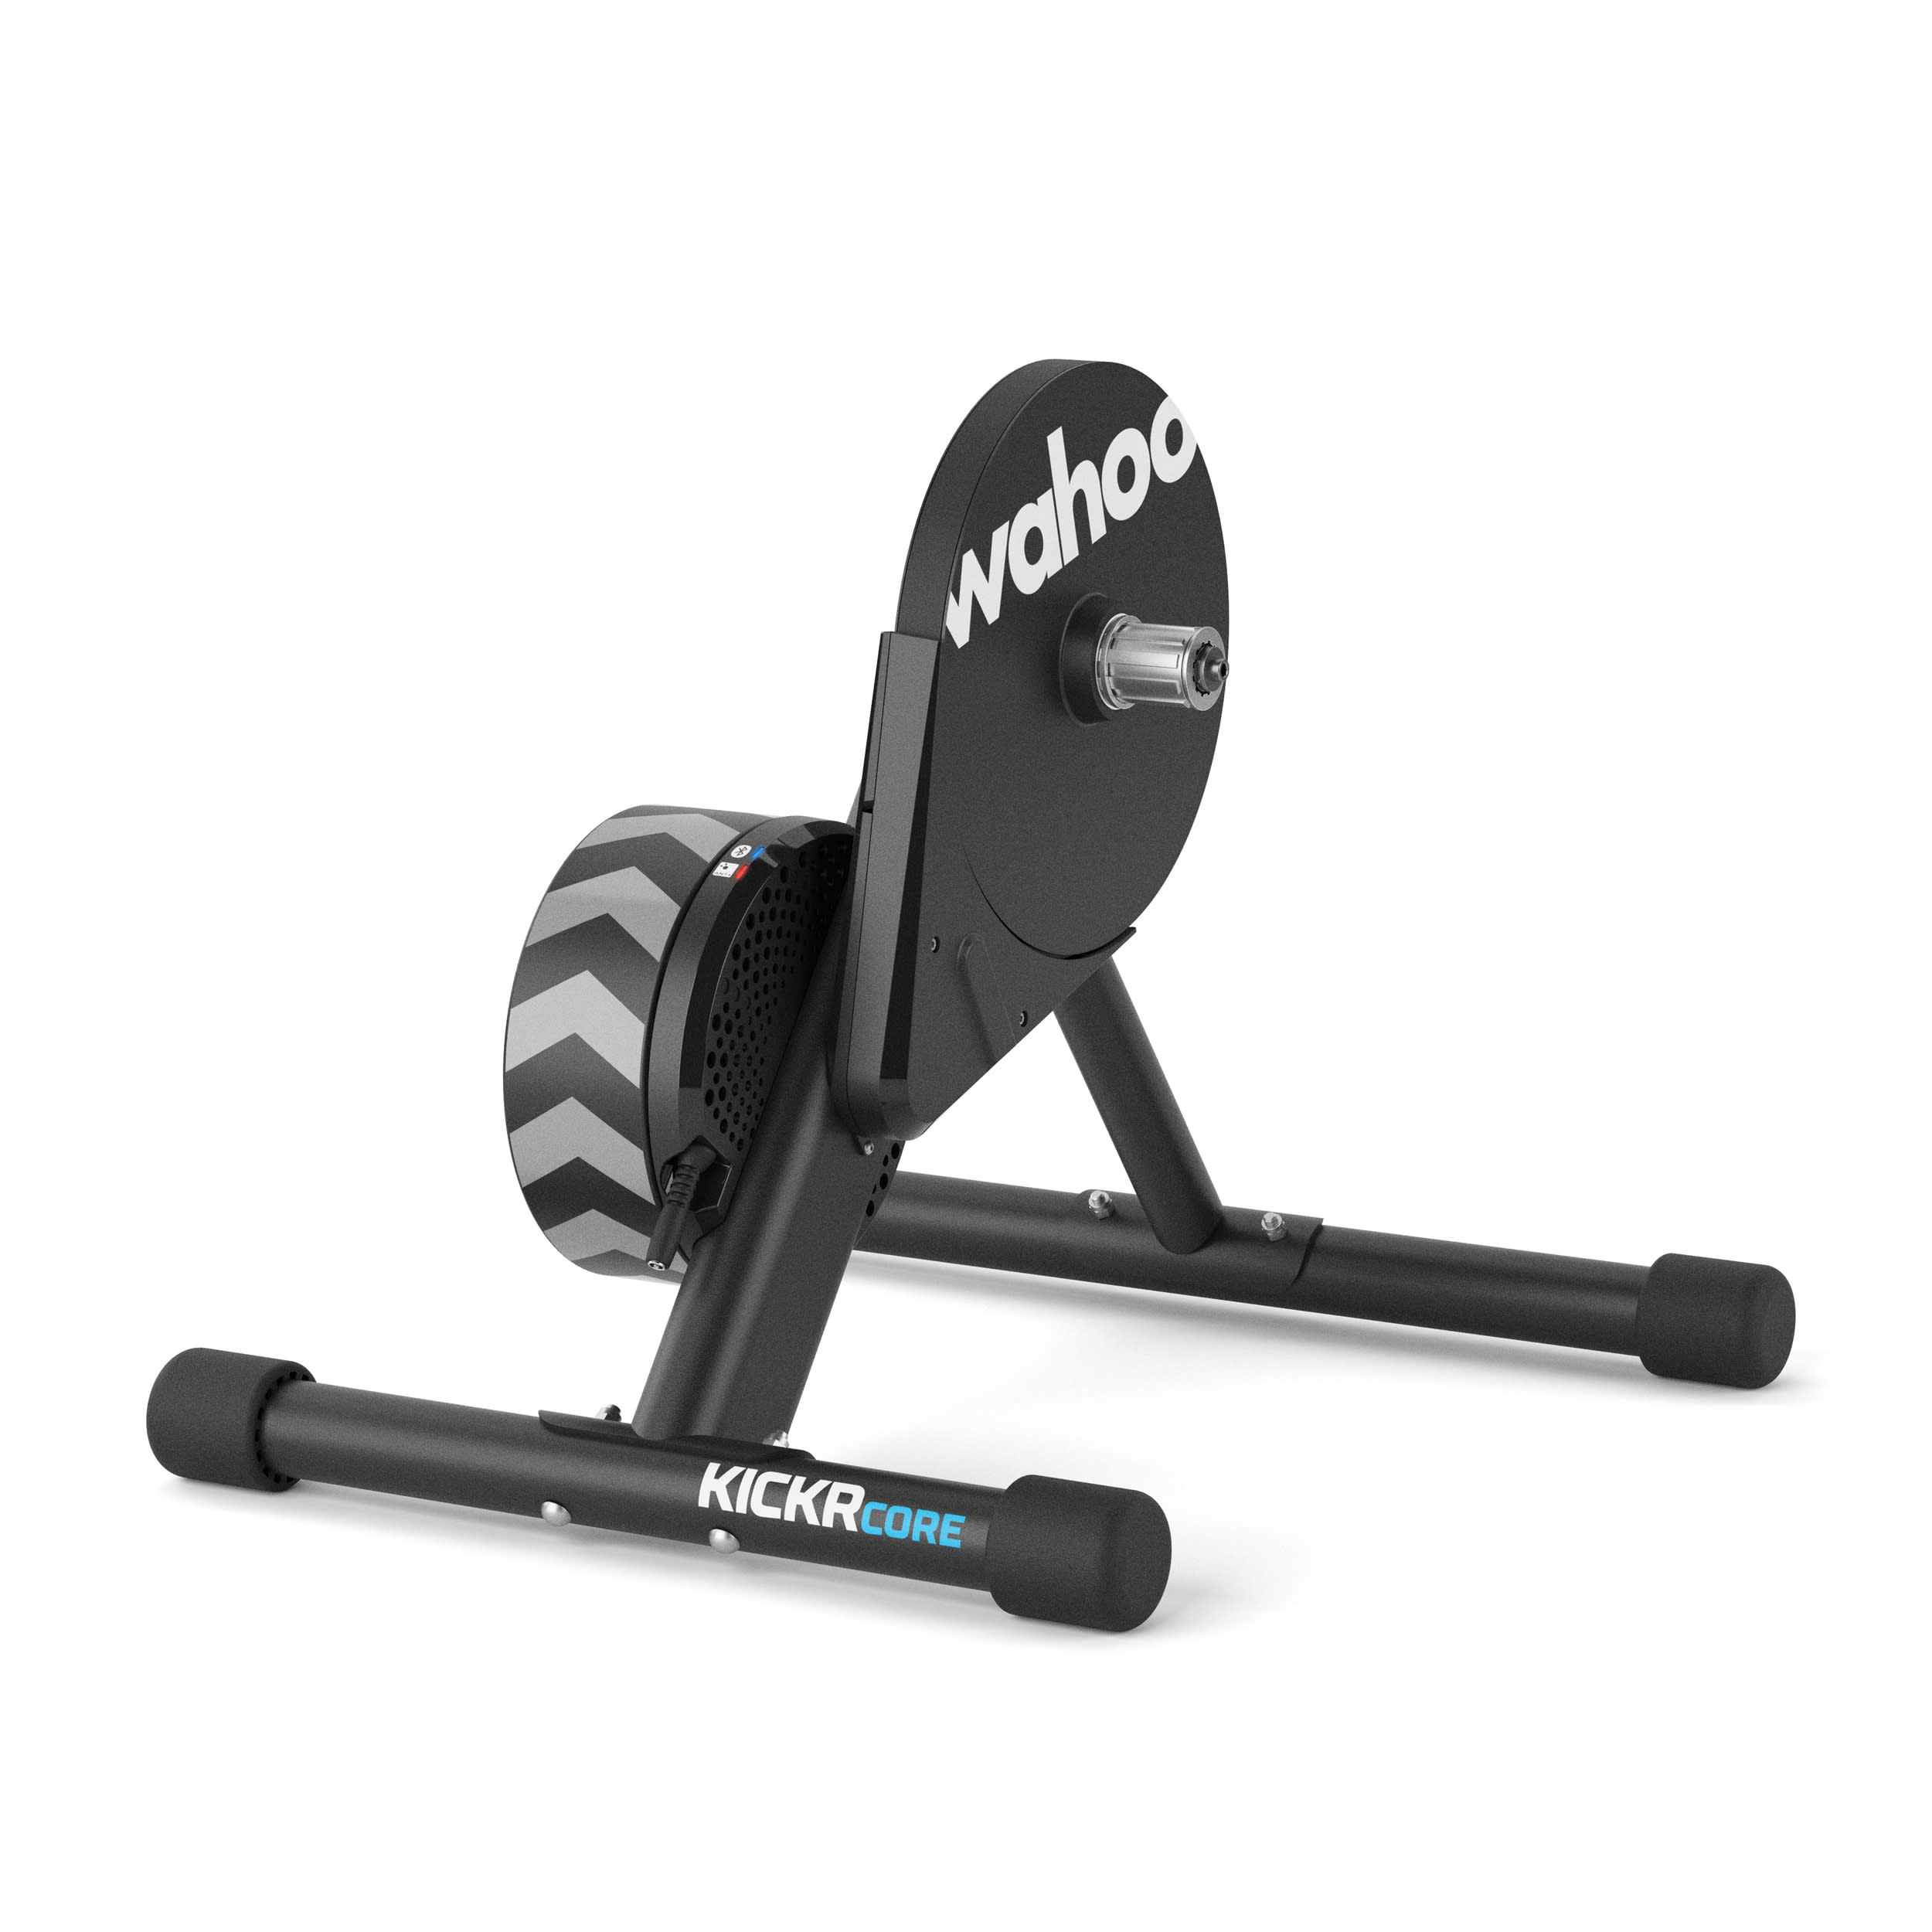 Buy Wahoo Fitness Kickr Core from Outnorth